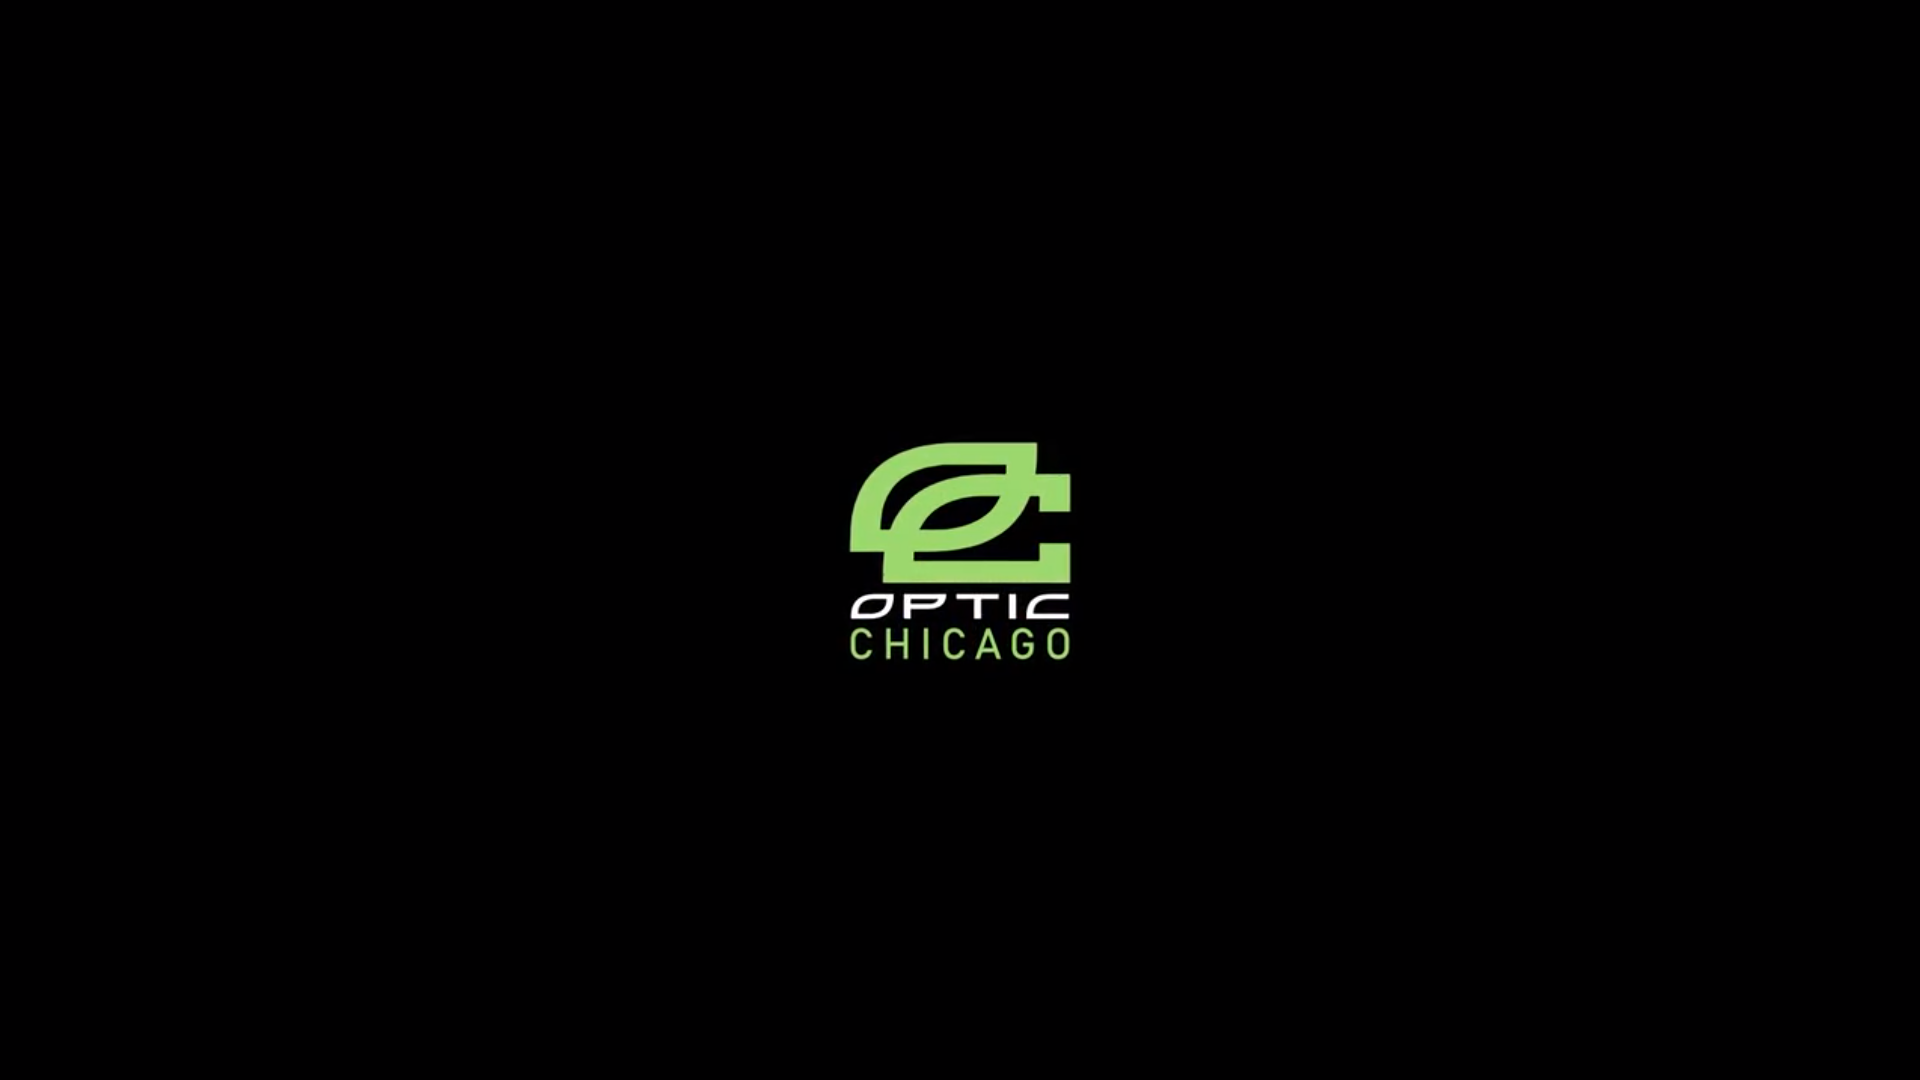 OpTic Chicago officially confirmed for CDL 2021